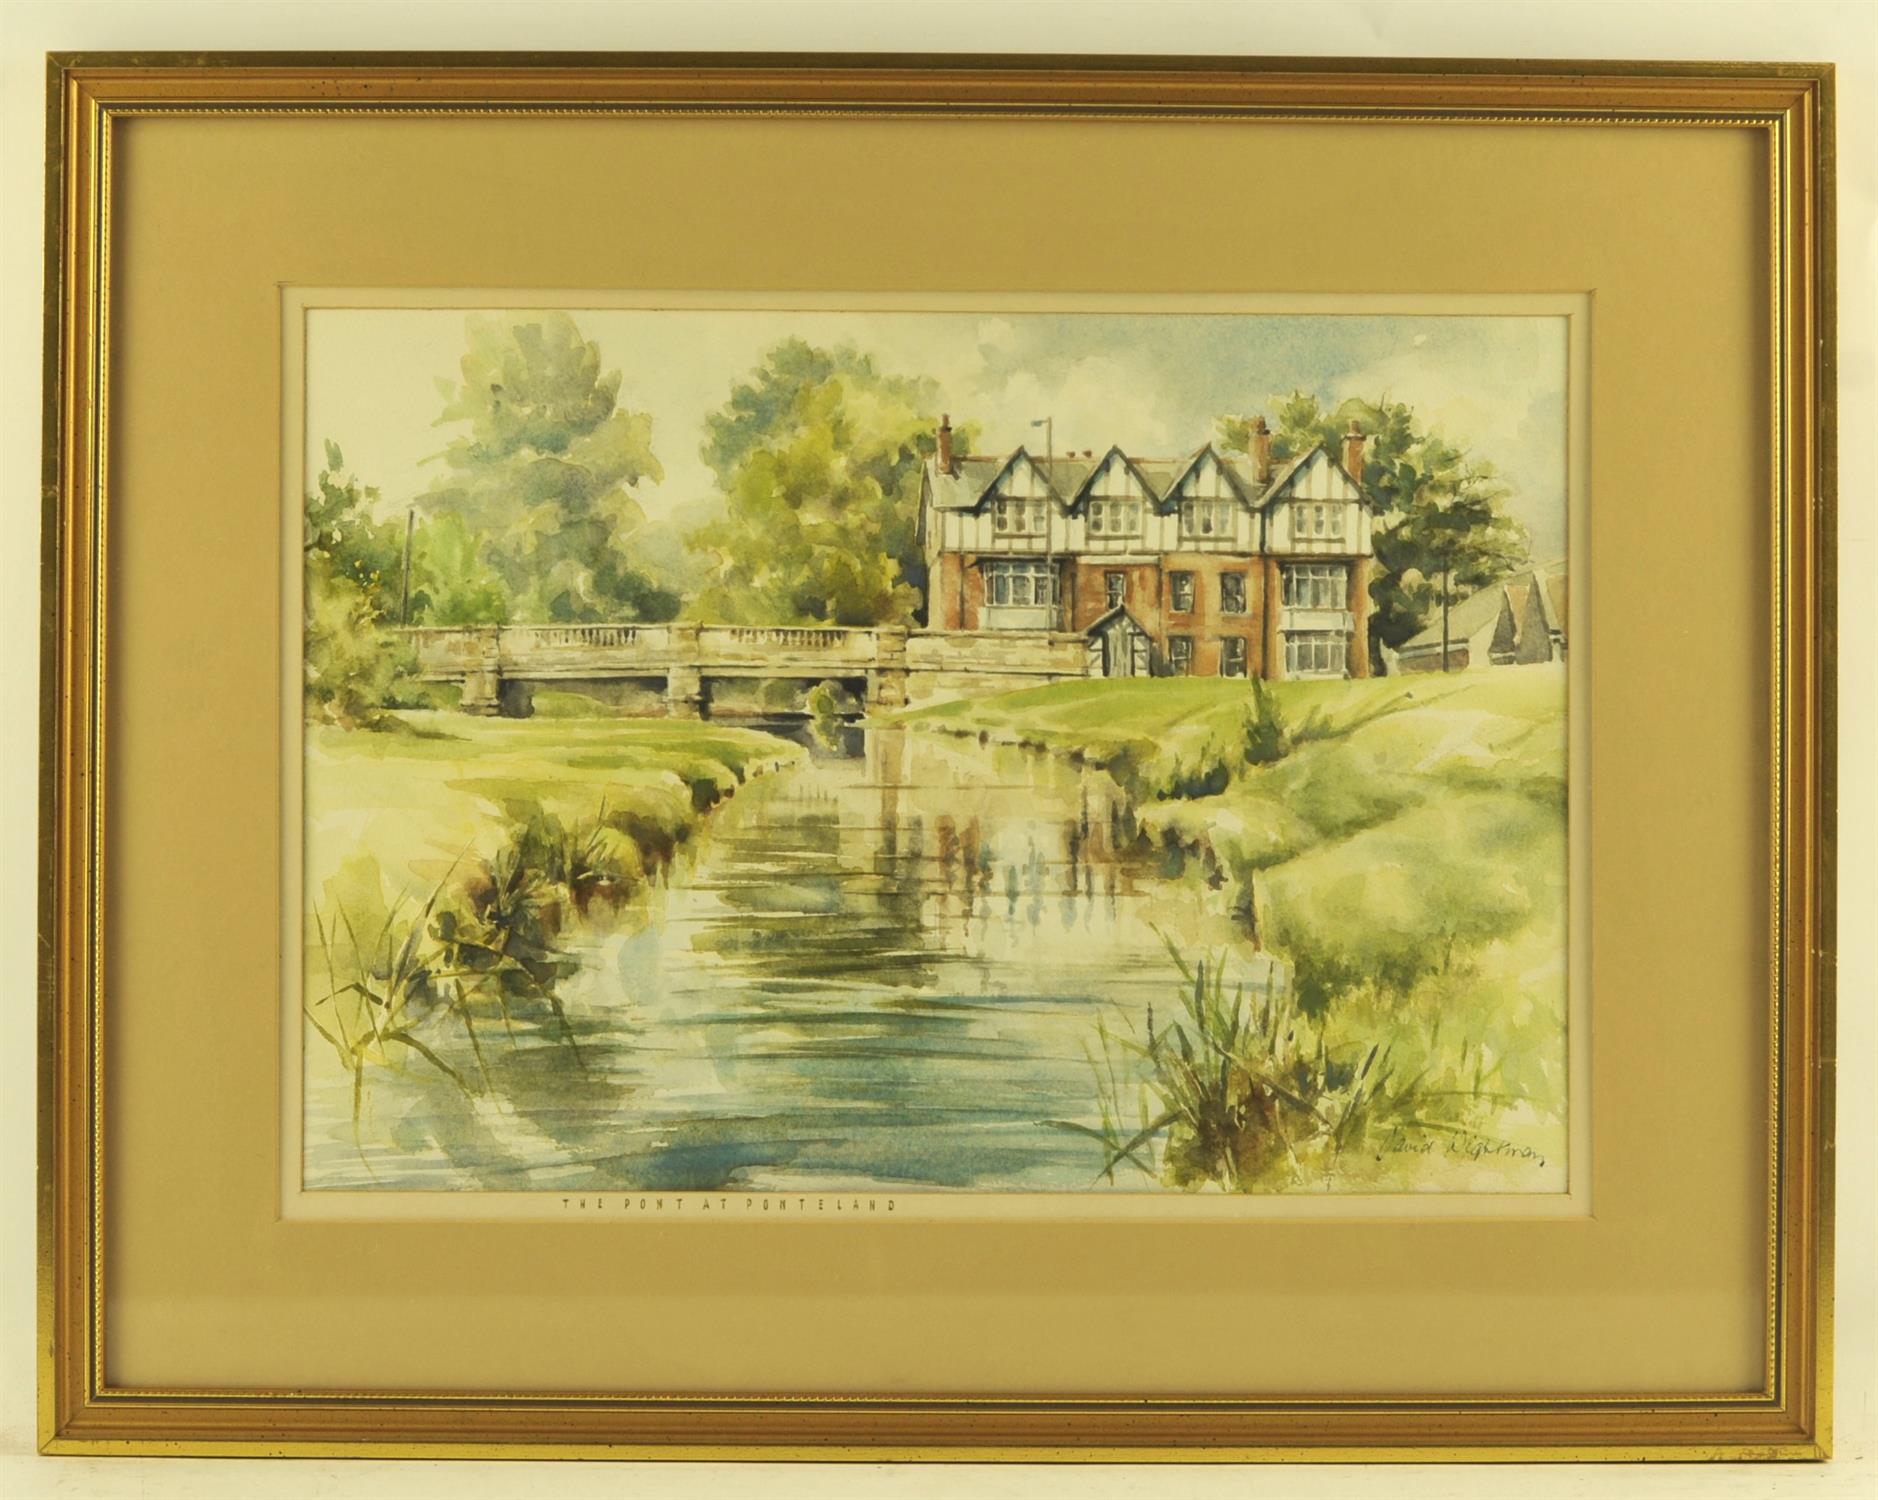 David Wightman (20th century), ‘The Pont at Ponteland’, watercolour, titled to the mount,